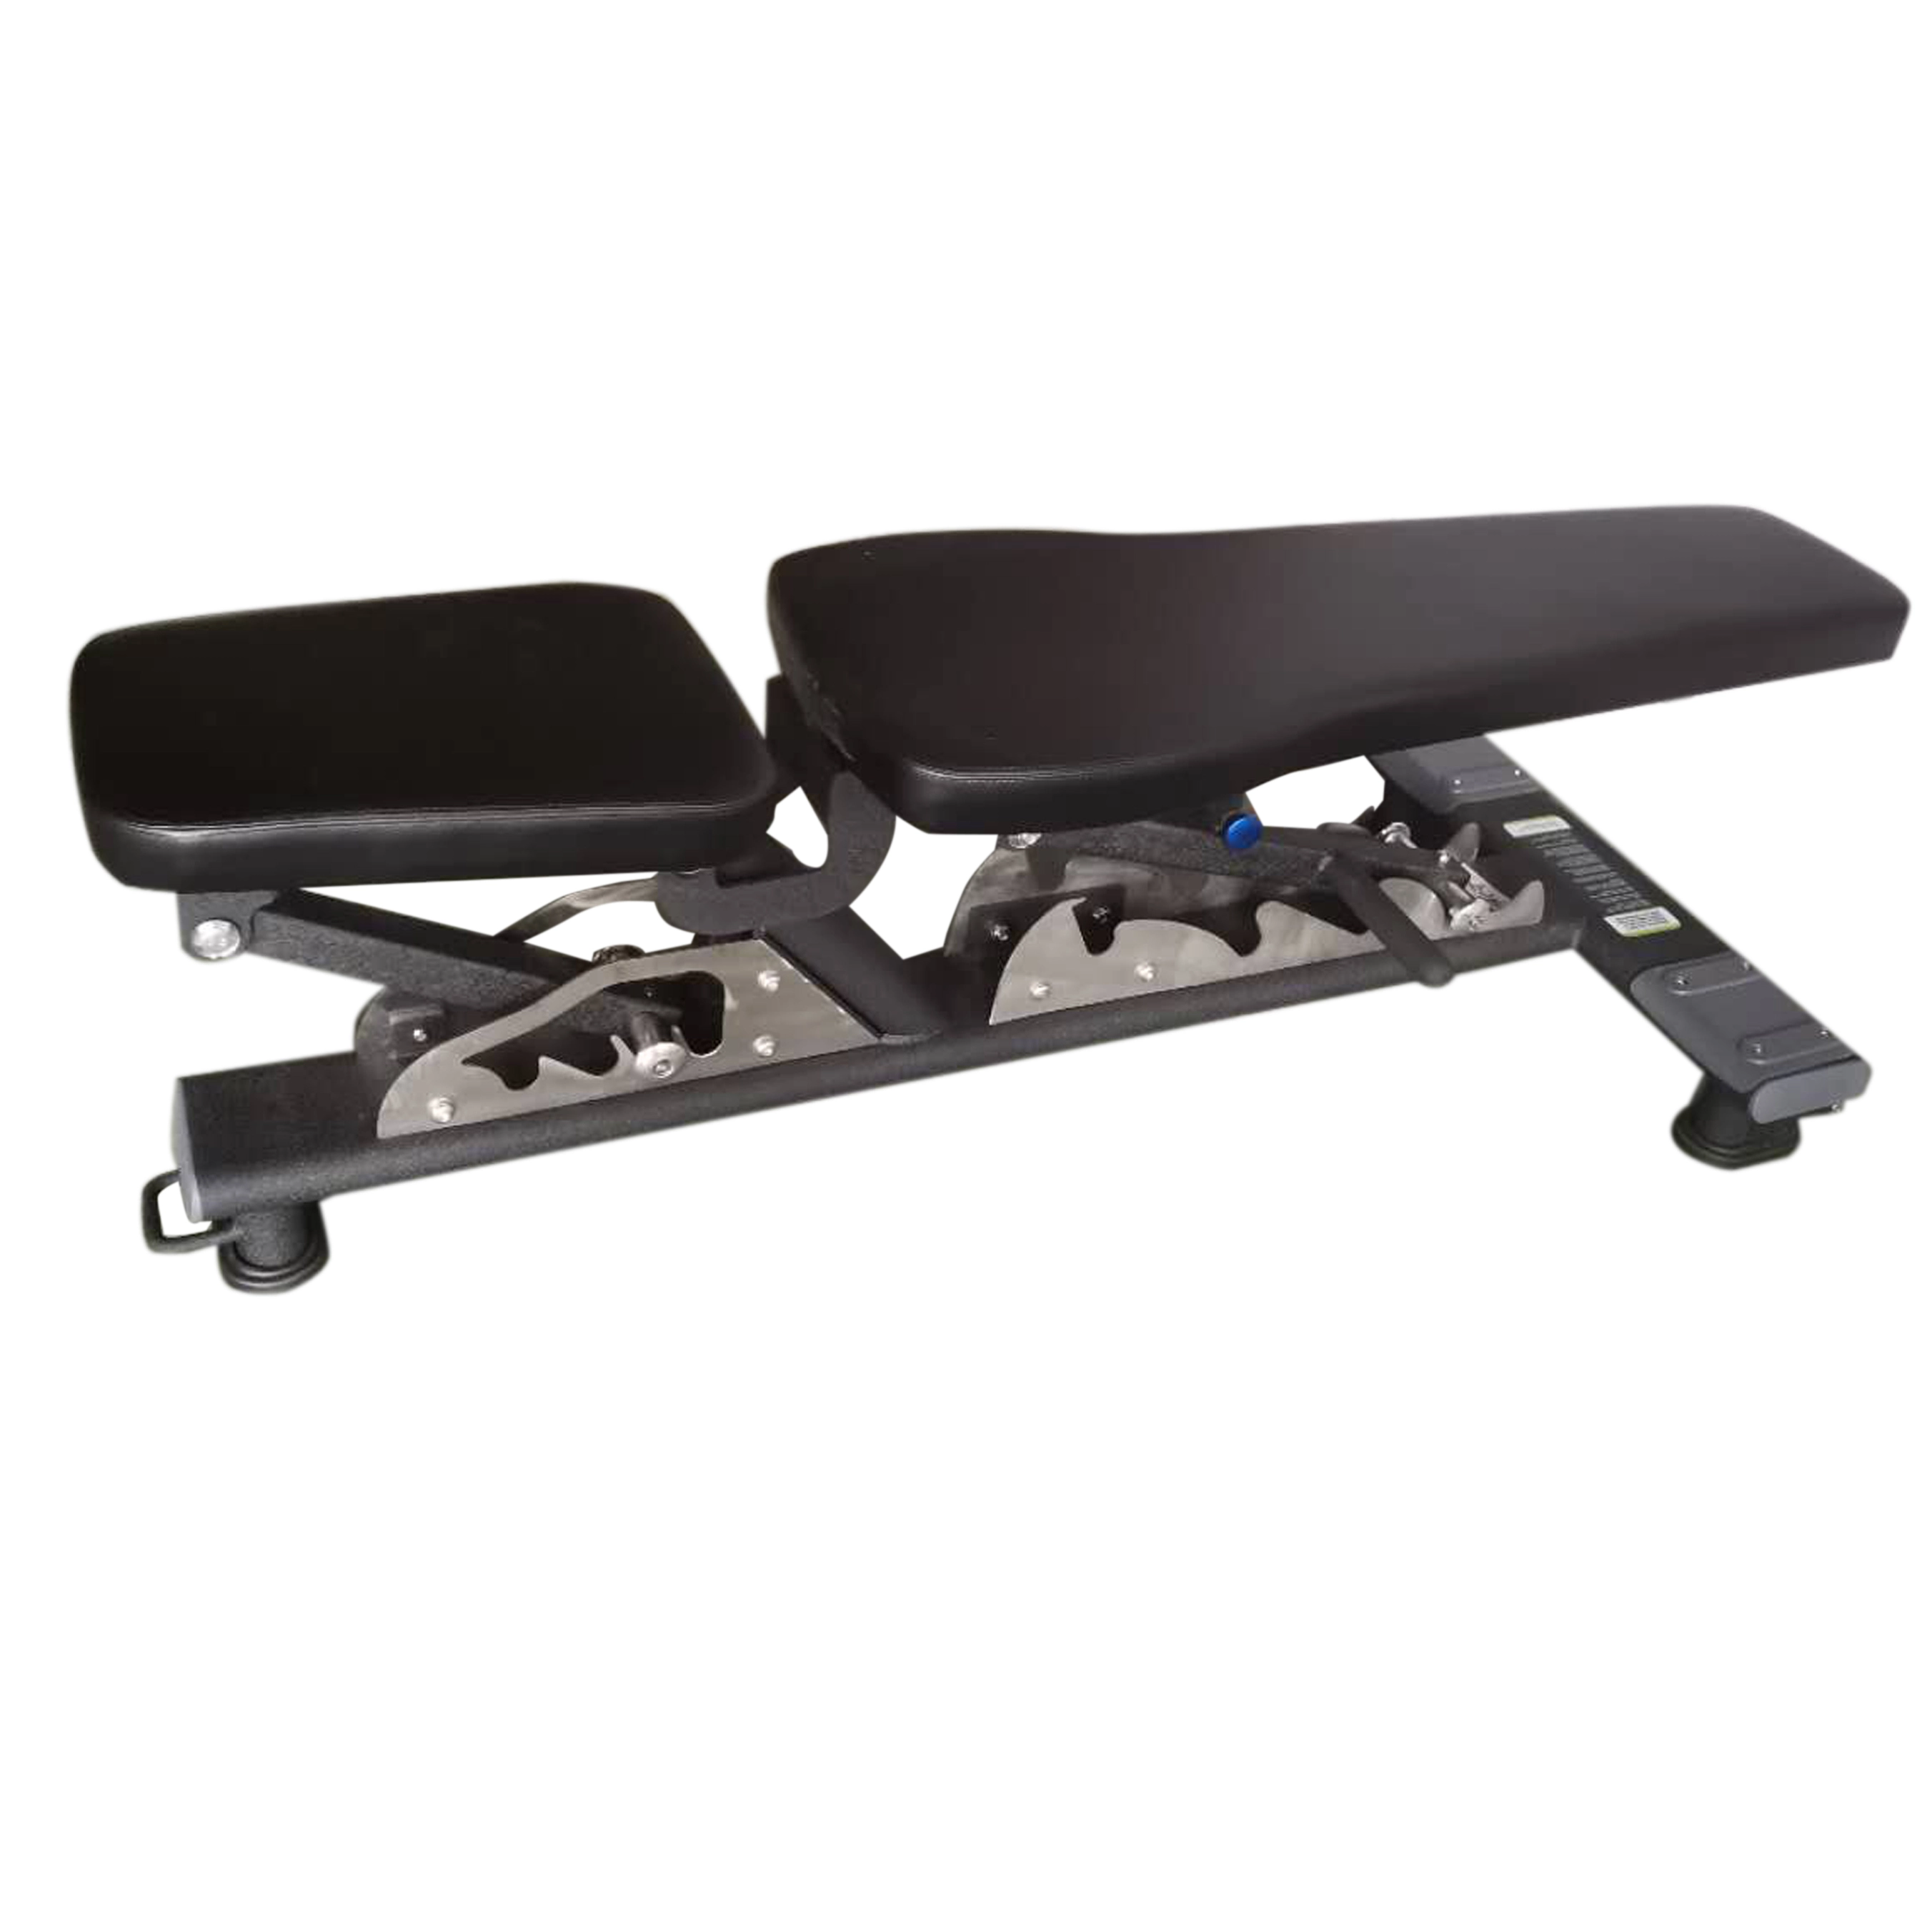 Gym Equipment Adjustable 3 in 1 Bench Press for dumbbell 